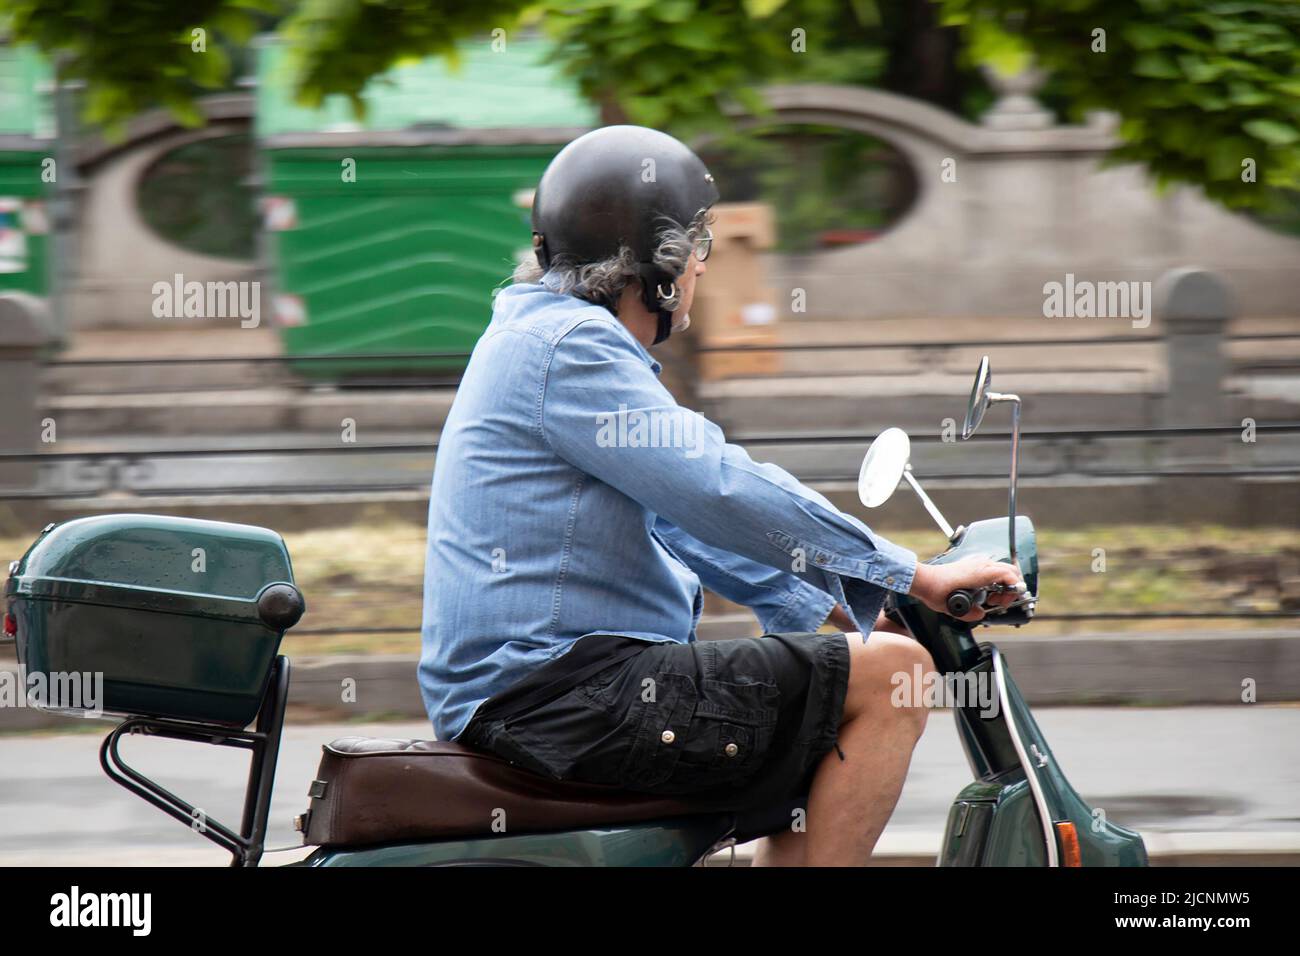 Belgrade, Serbia - May 28, 2022: Middle-aged man riding a green vespa scooter with rear trunk box on city street next to the park Stock Photo